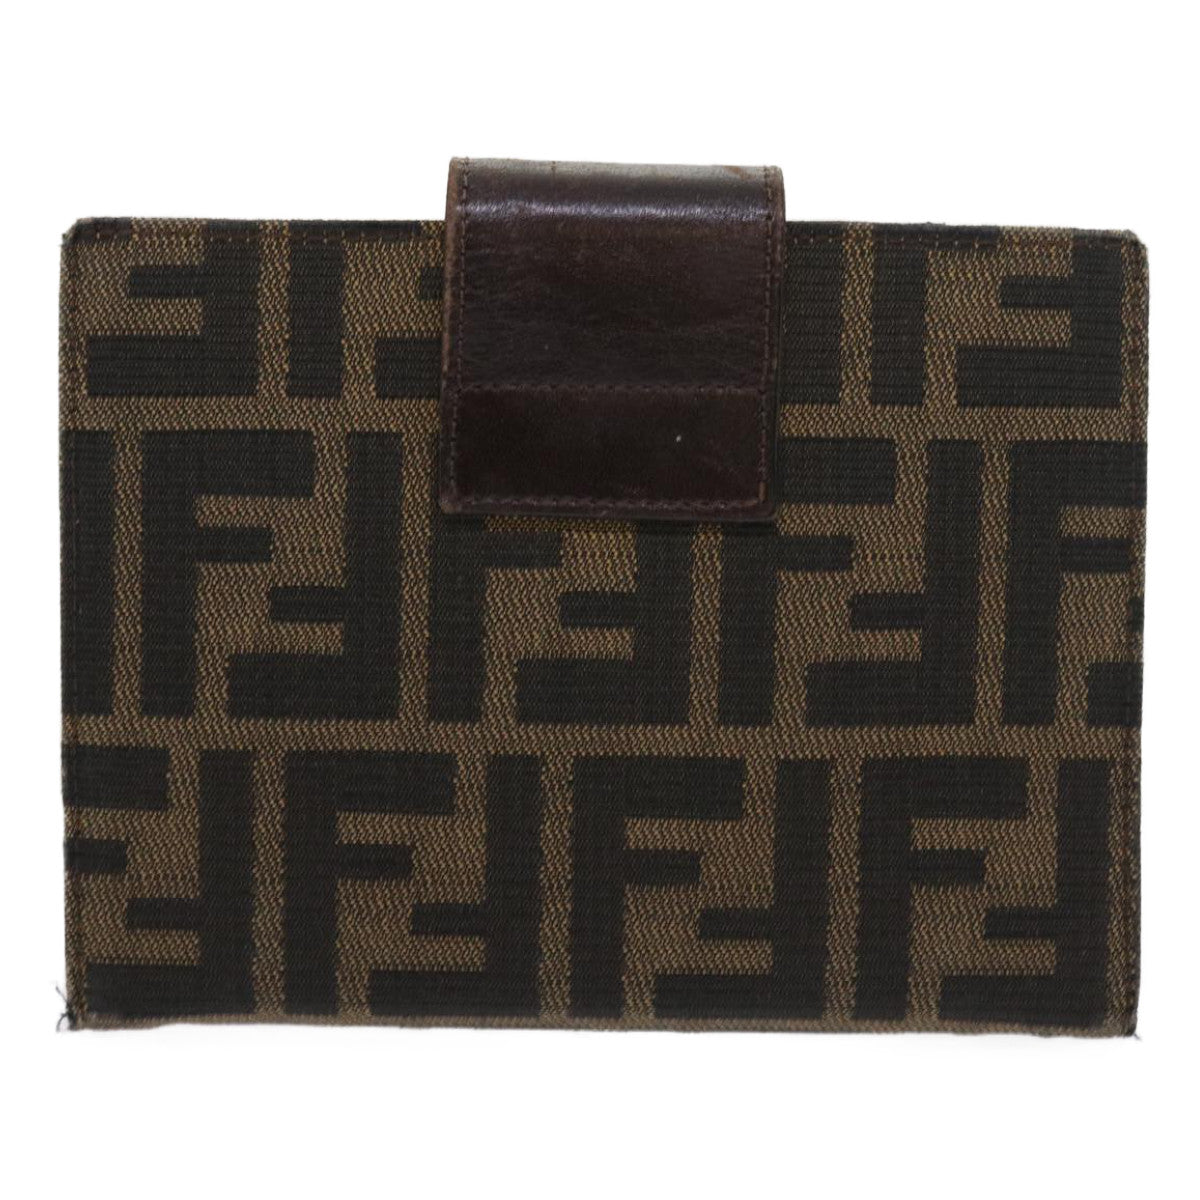 FENDI Zucca Canvas Day Planner Cover Black Brown 2289 31099 009 Auth 56779